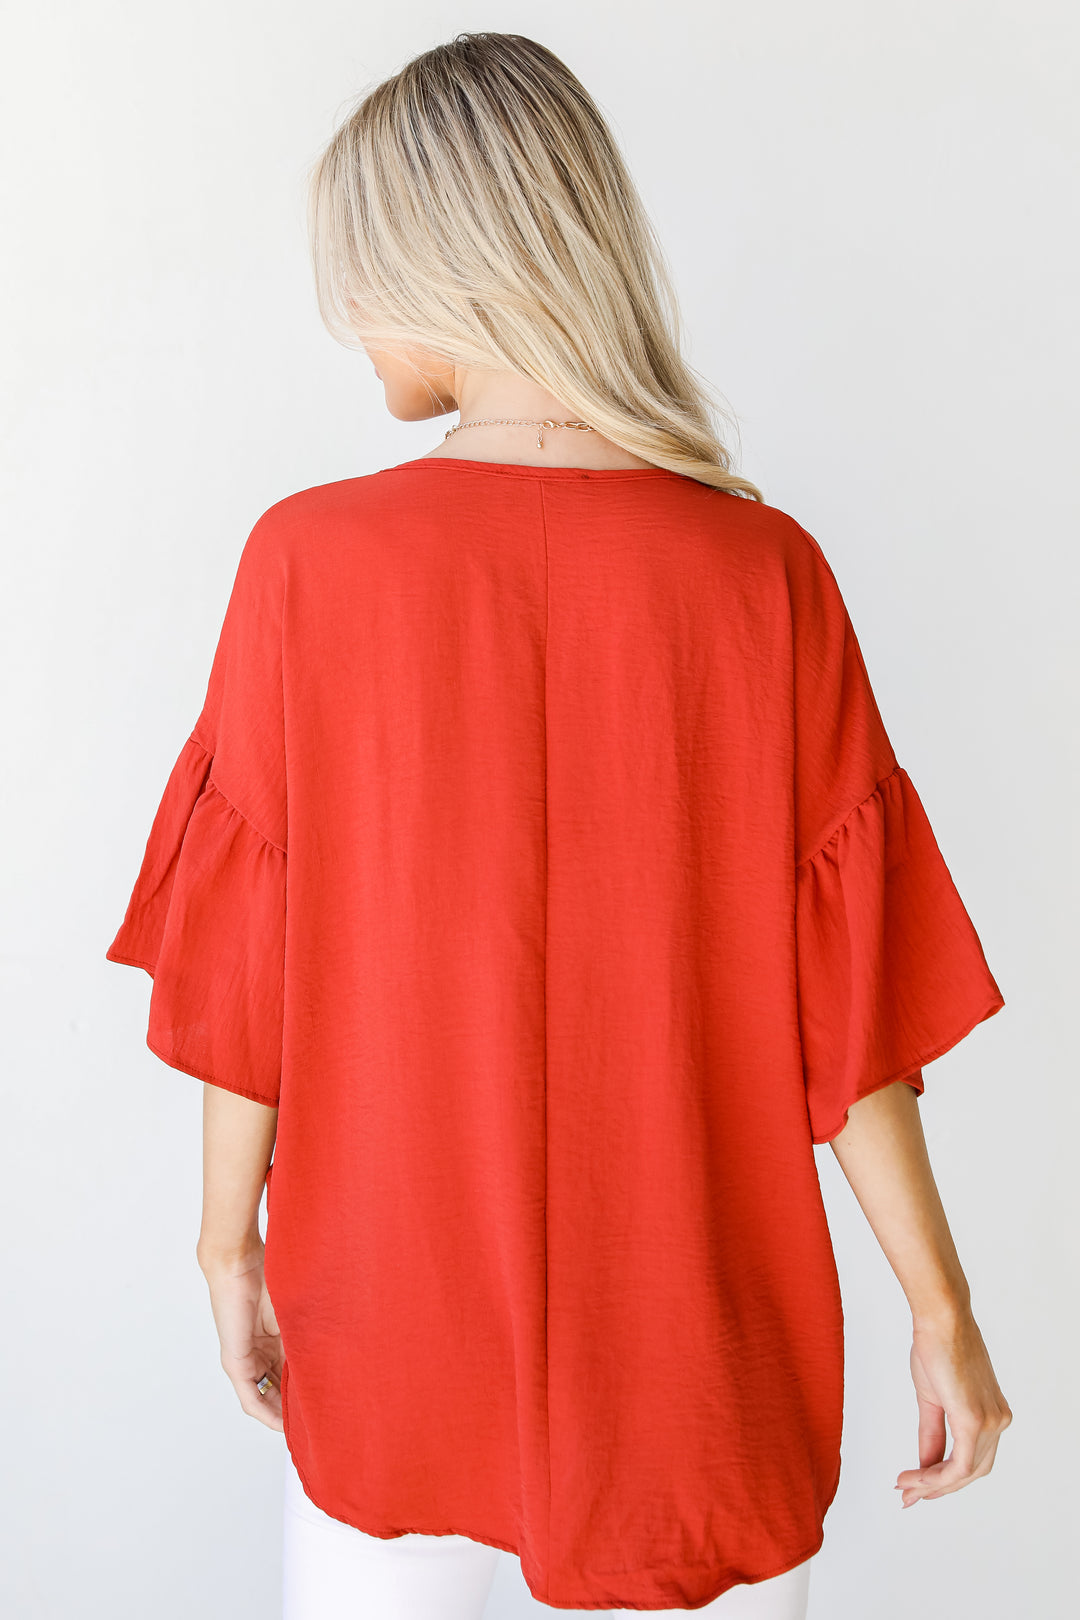 Ruffle Sleeve Blouse in brick back view